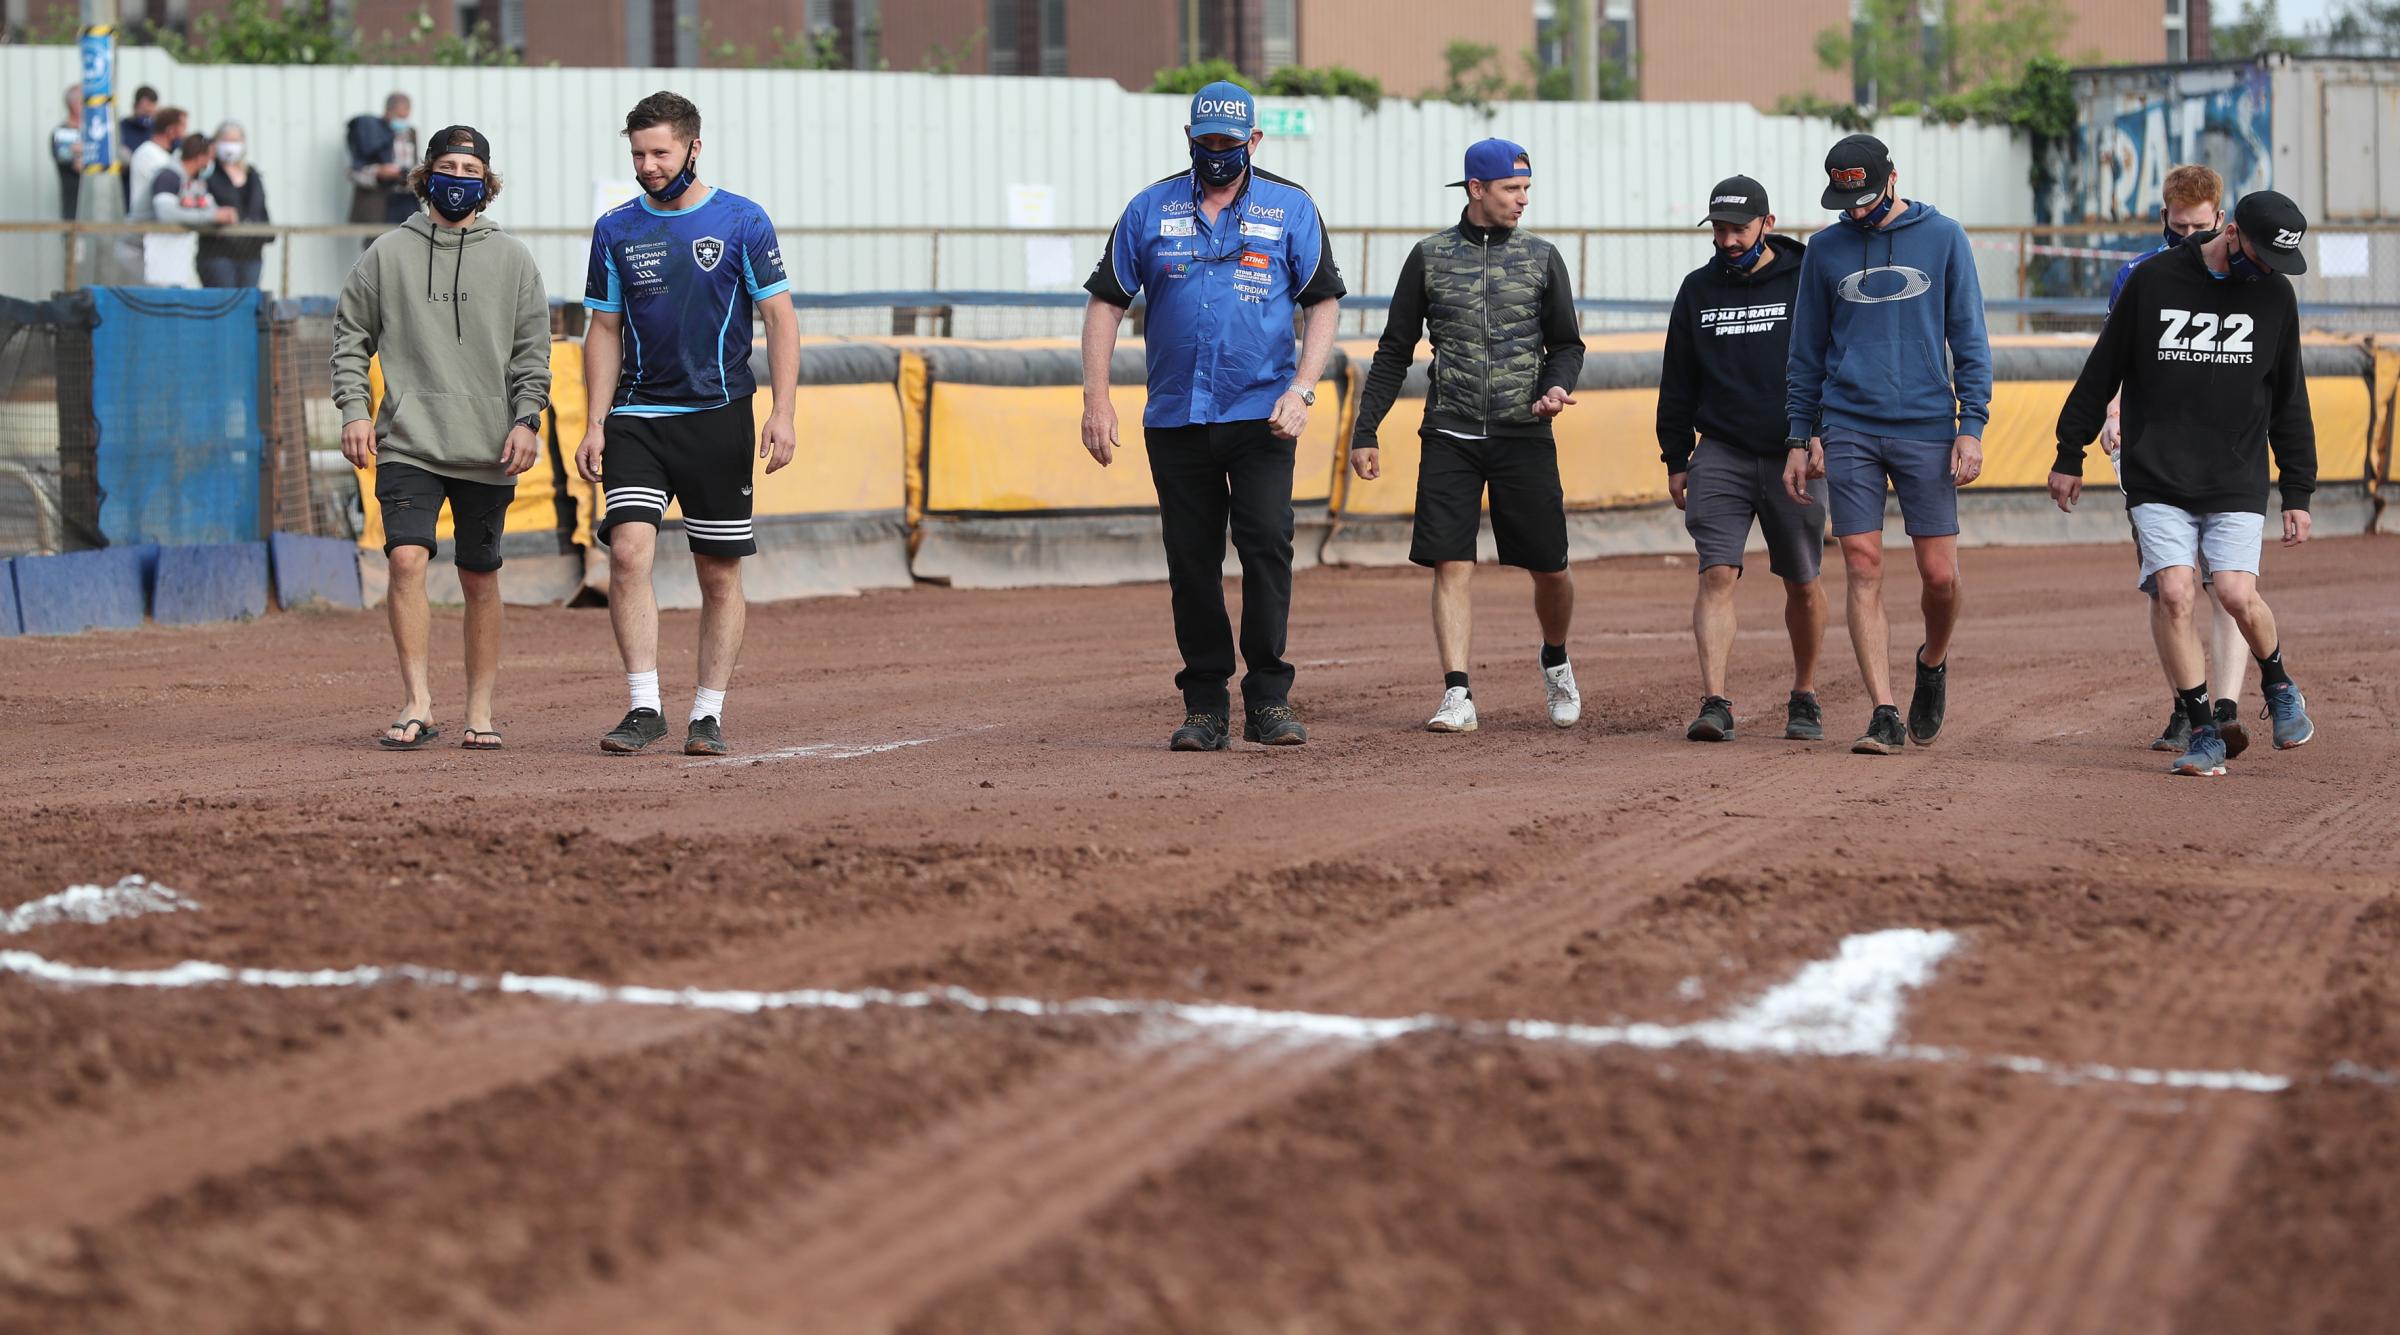 Poole Pirates speedway v Berwick Bandits. The first home meeting for the Pirates in the 2021 season. Neil Middleditch walk the track with the team..